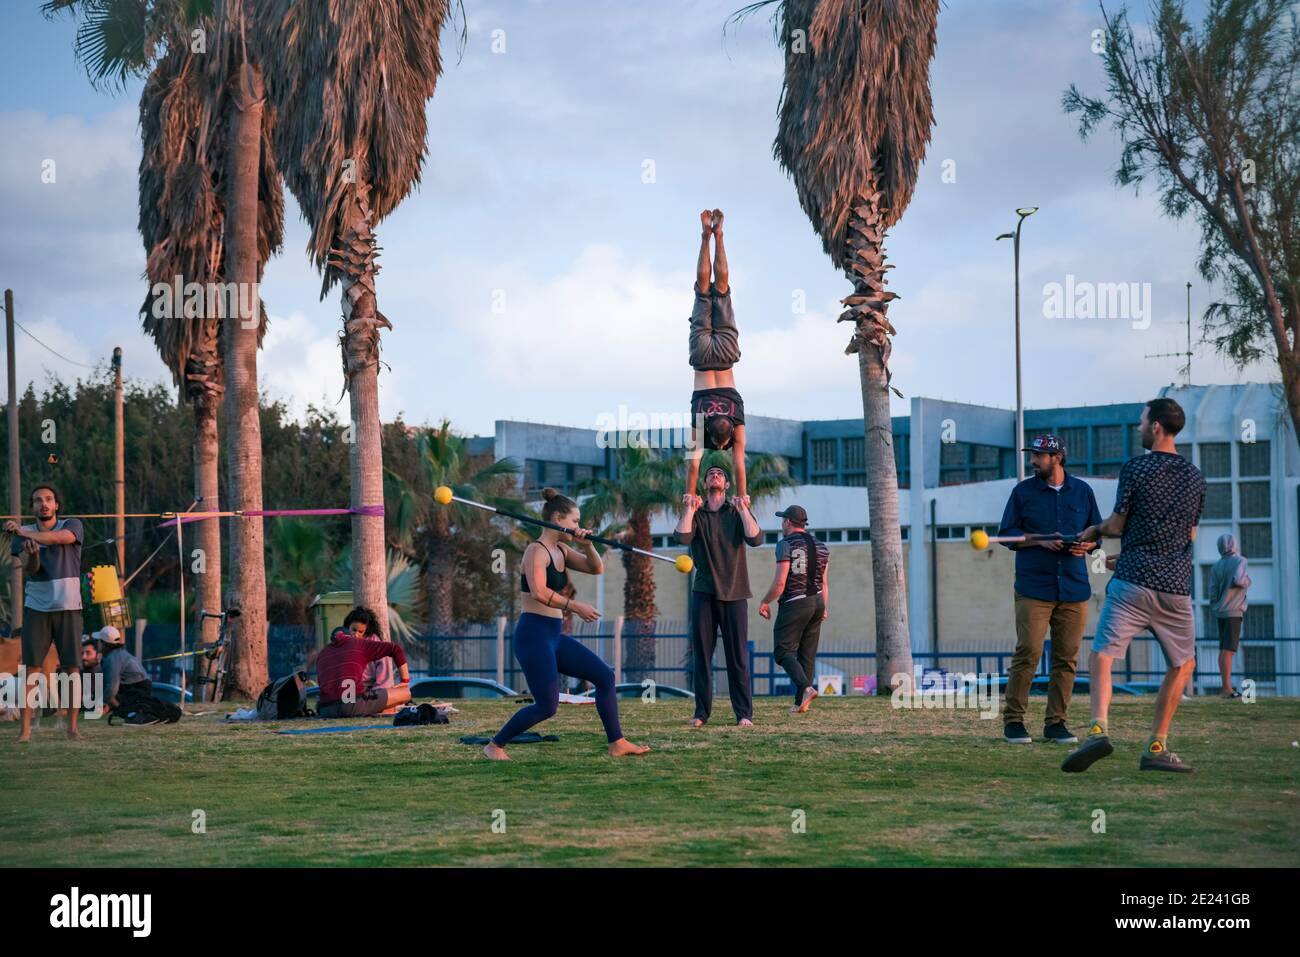 People Practice Acro Yoga, slackline, Spirits, Juggling, Outdoors in the park. Healthy Lifestyle, Tel Aviv, Israel. High quality photo Stock Photo